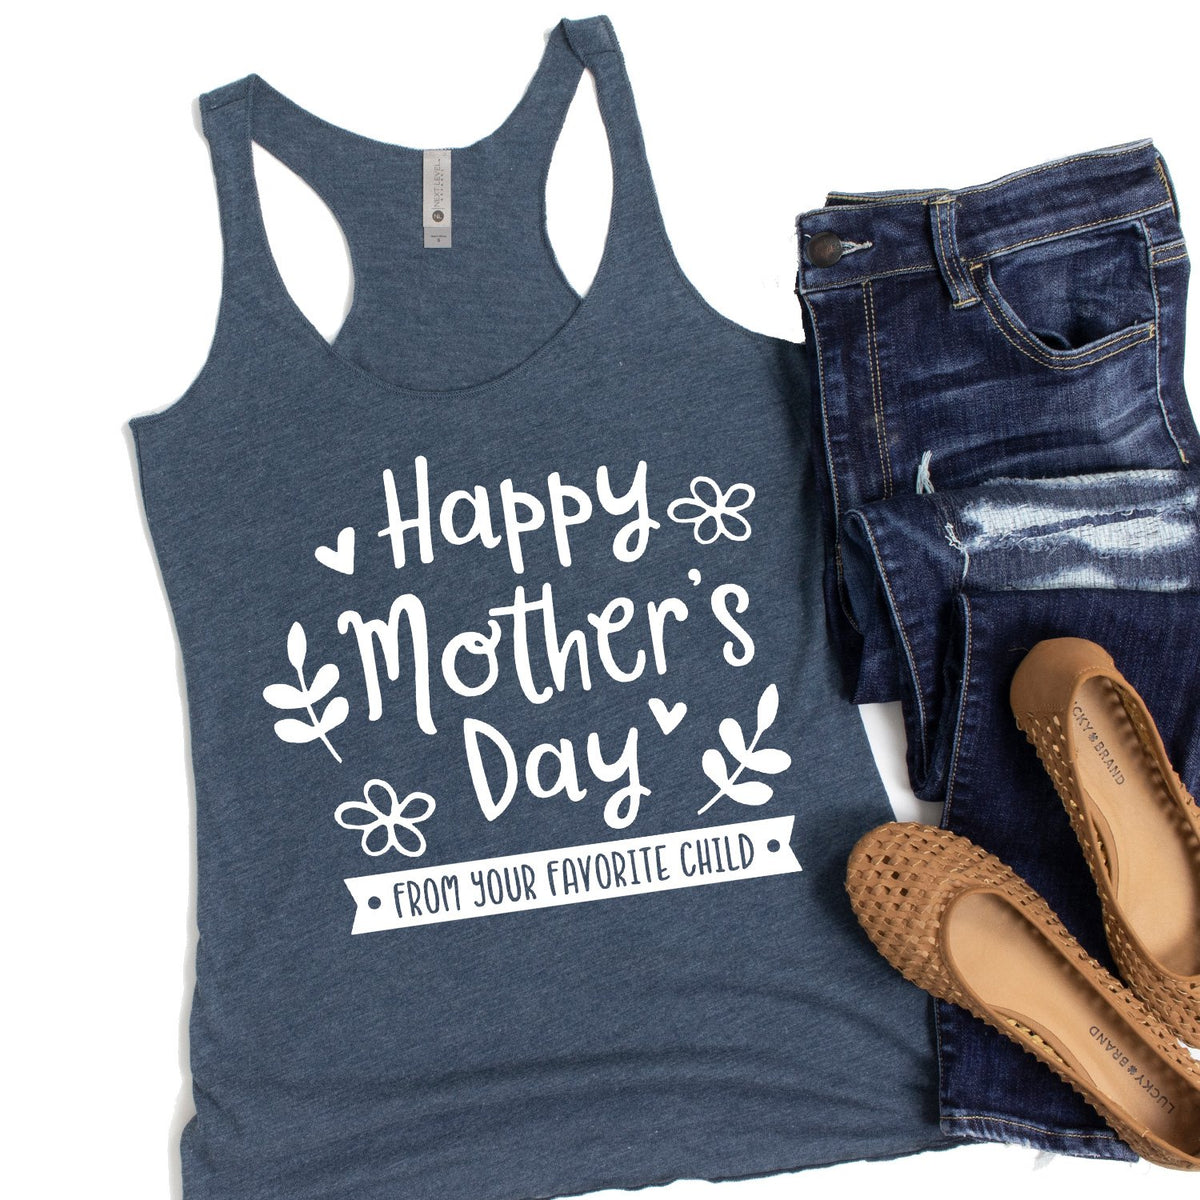 Happy Mother&#39;s Day From Your Favorite Child - Tank Top Racerback